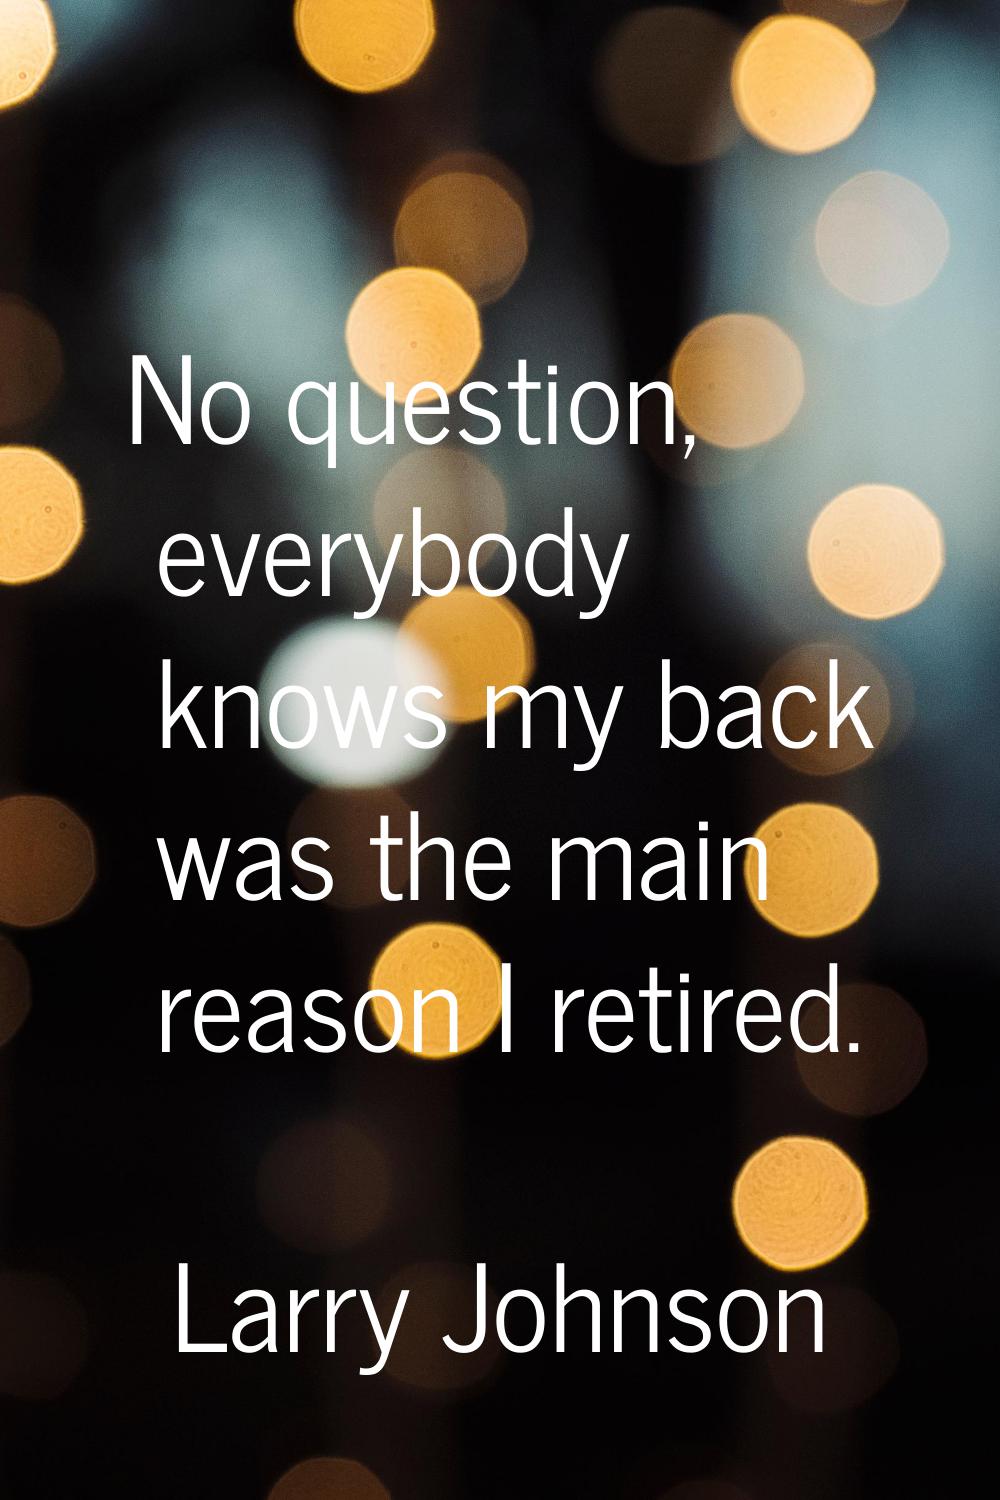 No question, everybody knows my back was the main reason I retired.